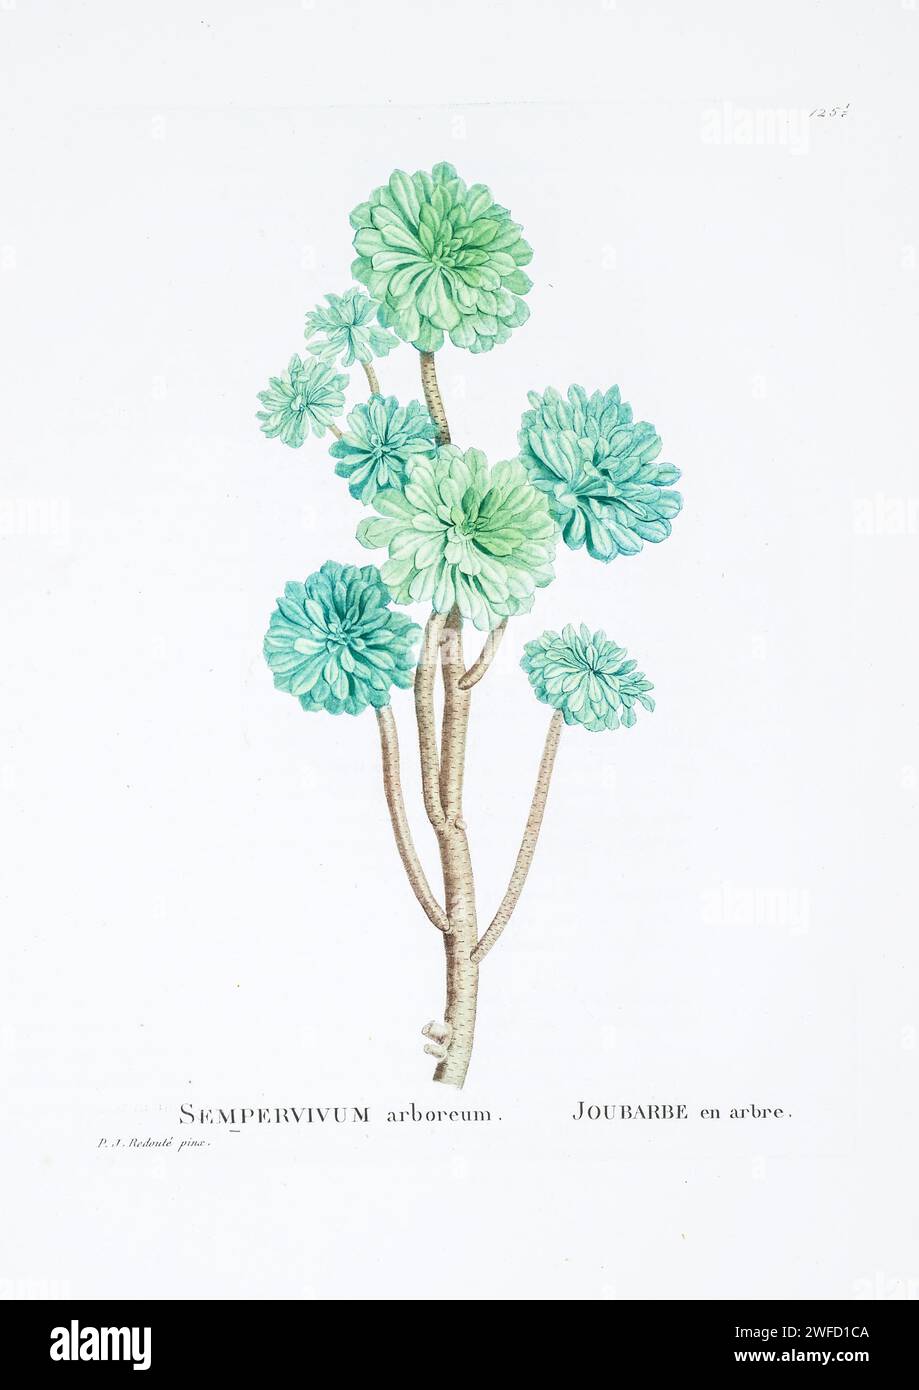 Aeonium arboreum (L.) Webb & Berth. Here As Sempervivum arboreum from History of Succulent Plants [Plantarum historia succulentarum / Histoire des plantes grasses] painted by Pierre-Joseph Redouté and described by Augustin Pyramus de Candolle 1799 Aeonium arboreum, the tree aeonium, tree houseleek, or Irish rose, is a succulent, subtropical subshrub in the flowering plant family Crassulaceae. It is an invasive weed in places outside its natural distribution, for example as a garden escape throughout temperate southern Australia. Stock Photo